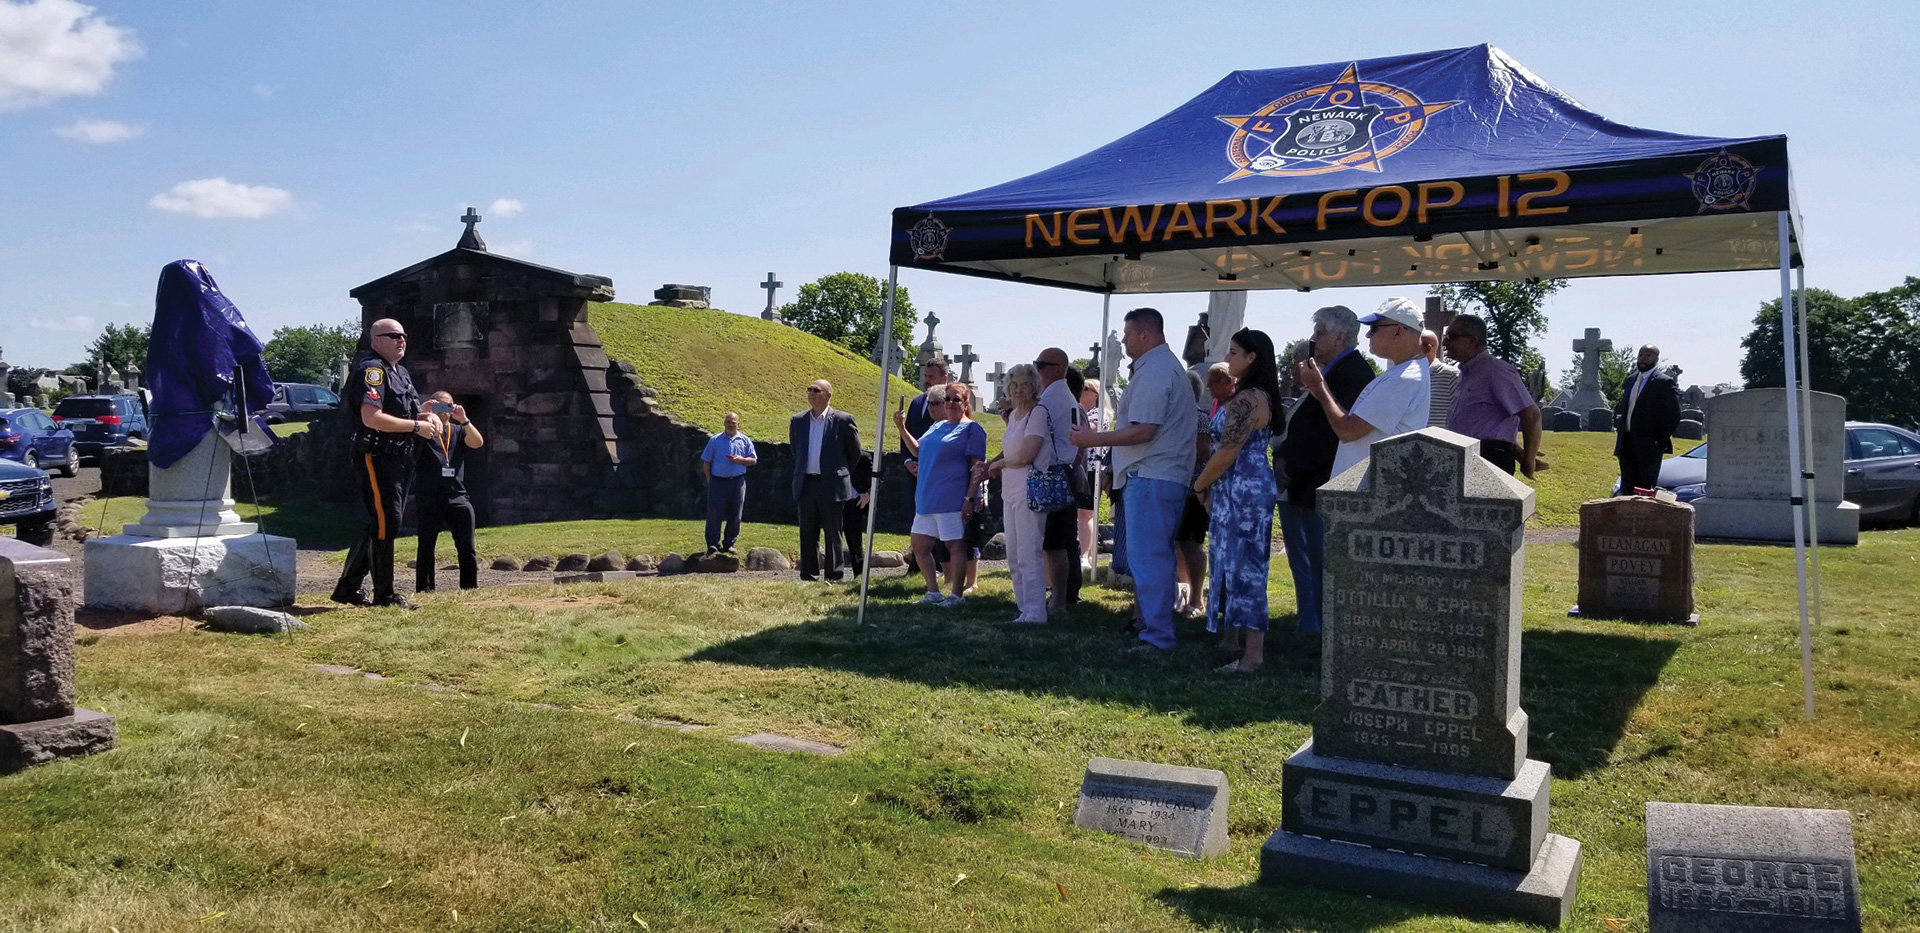 detective-thomas-adubato-honored-by-newark-fop-103-years-after-his-death-2